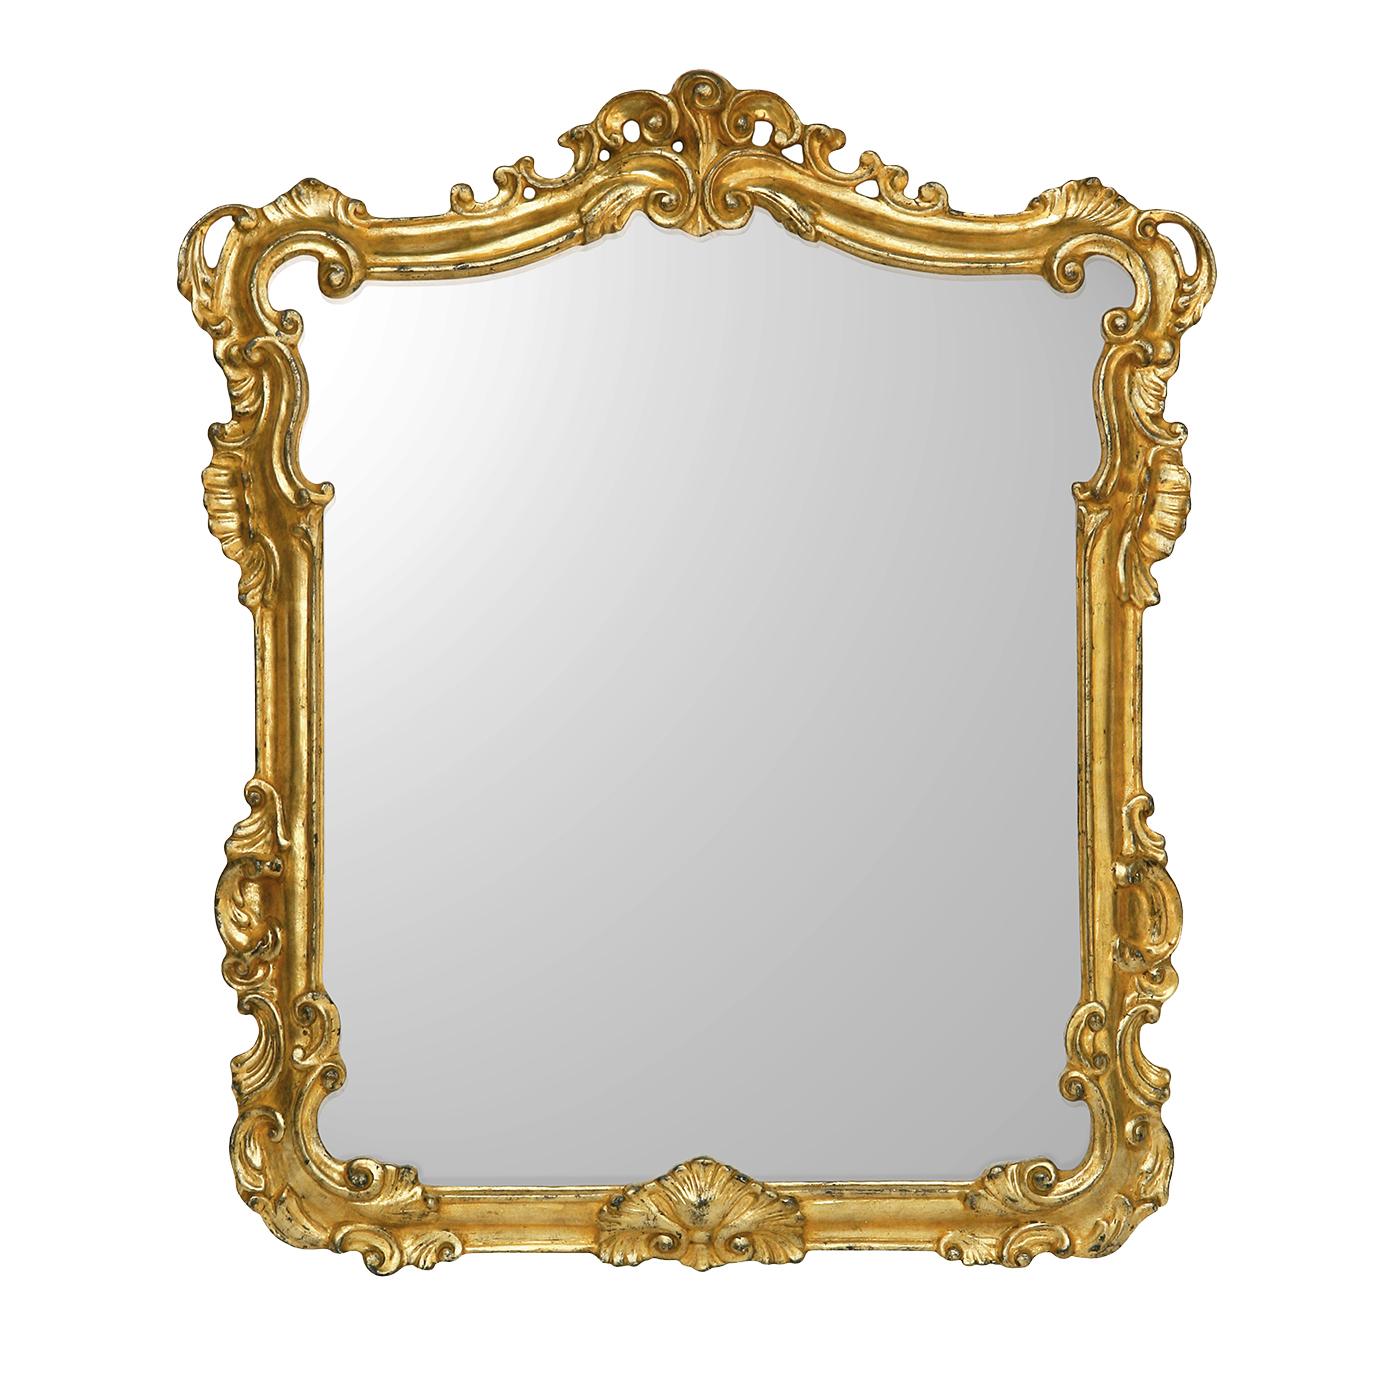 This superb mirror features a rectangular frame made of wood that was carved by hand and adorned throughout with gold leaf with a magnificent aged patina that lends it an antique allure. Inspired by the sinuous decorations found in 17th and 18th